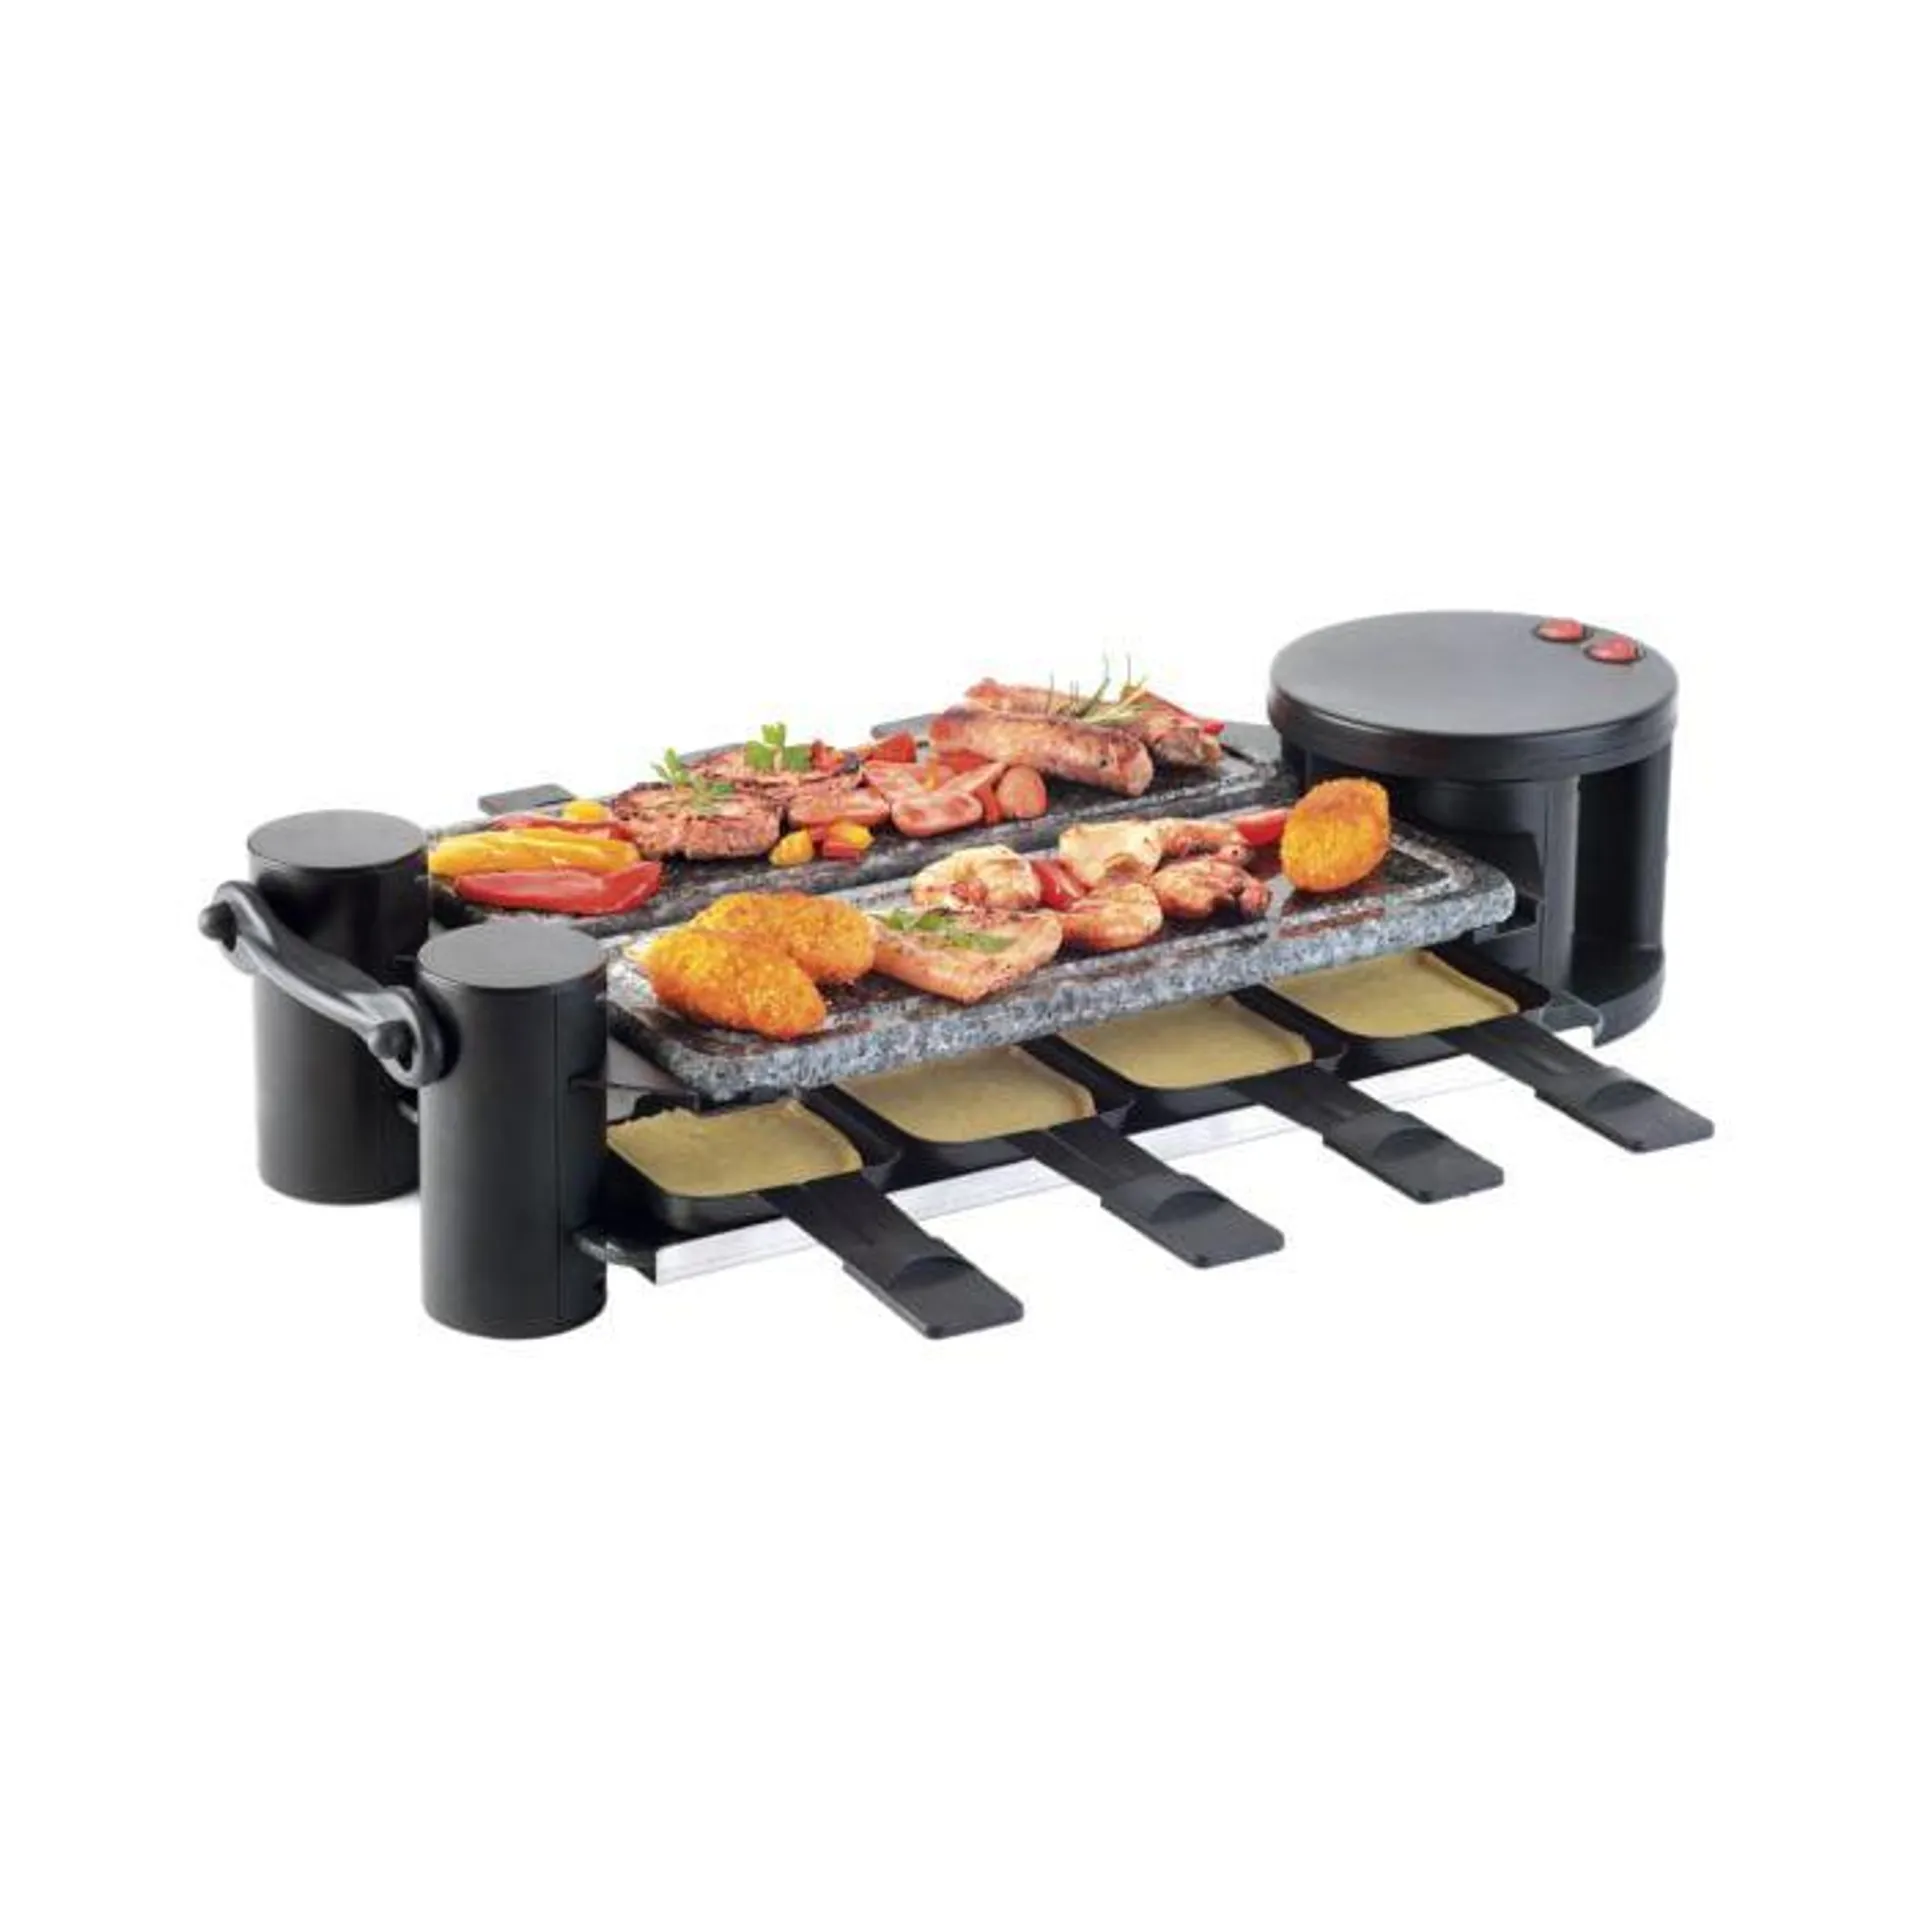 Ohmex Grill 5800 Raclette und Hot Stone